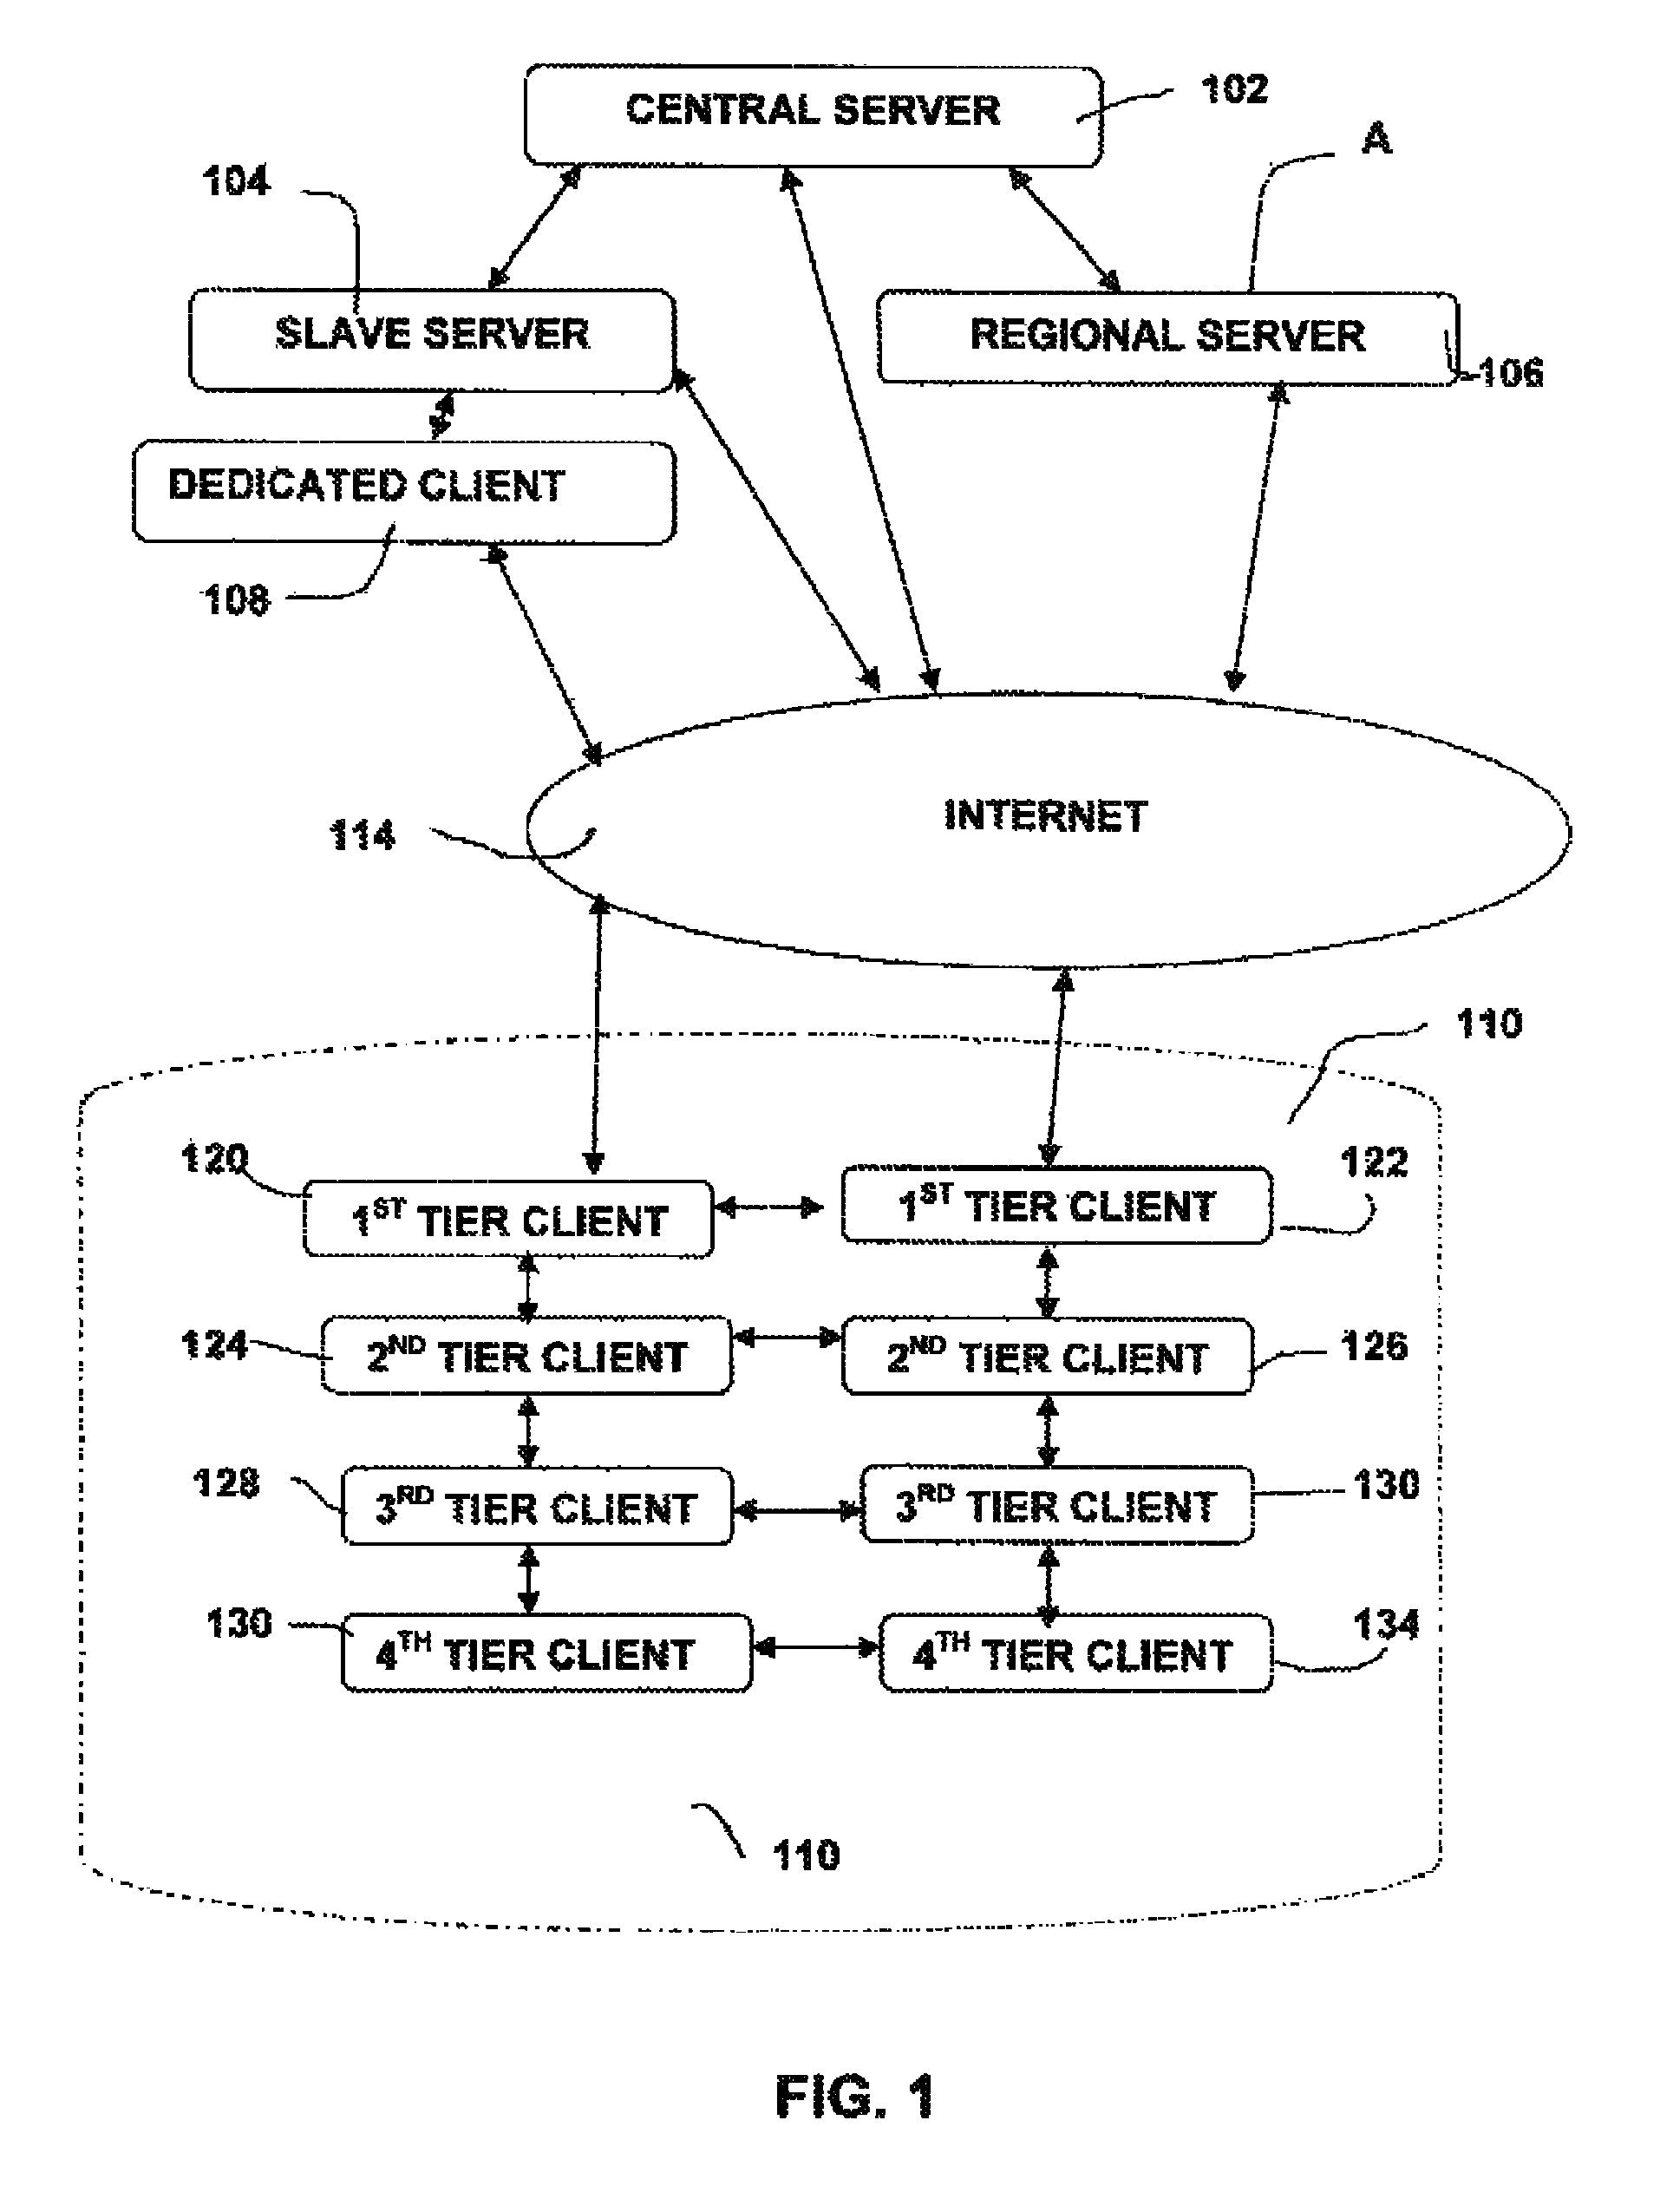 Content distribution systems